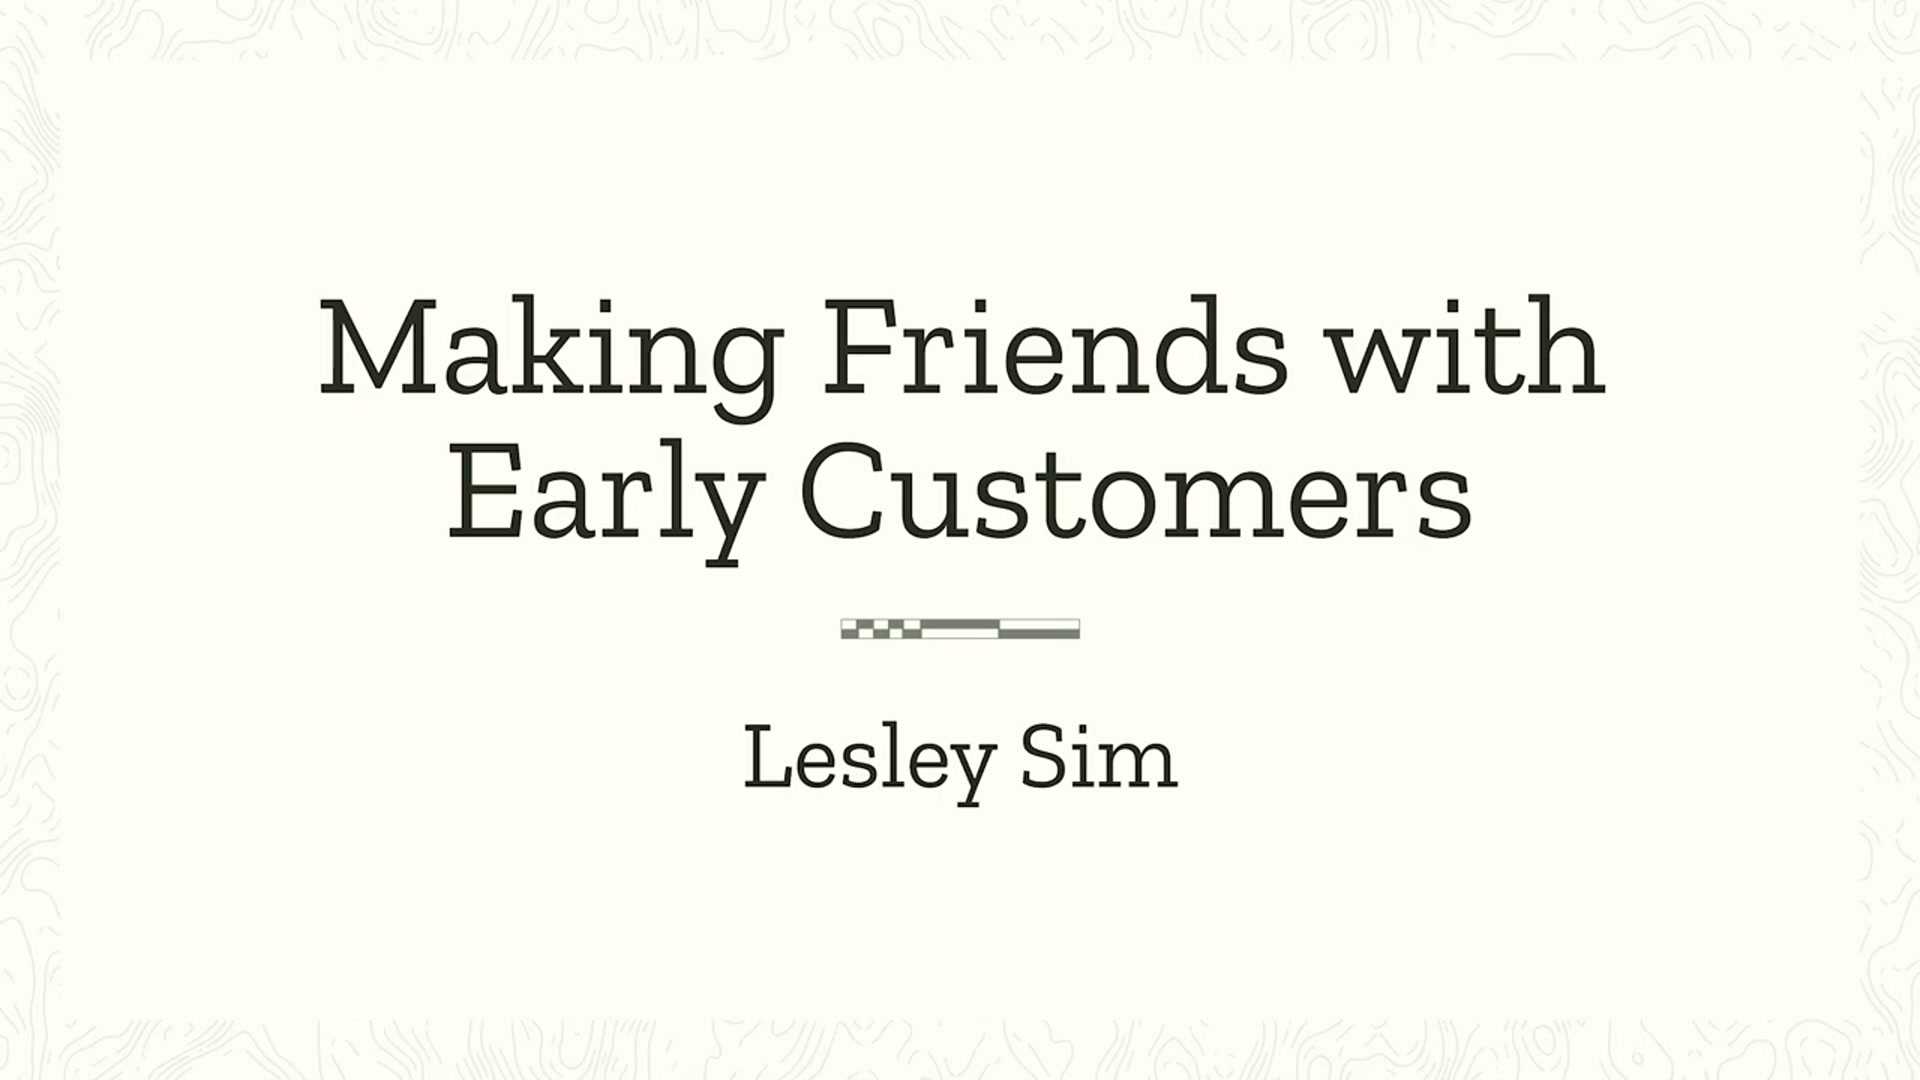 Lesley Sim: Making friends with early customers for better support, product knowledge and marketing